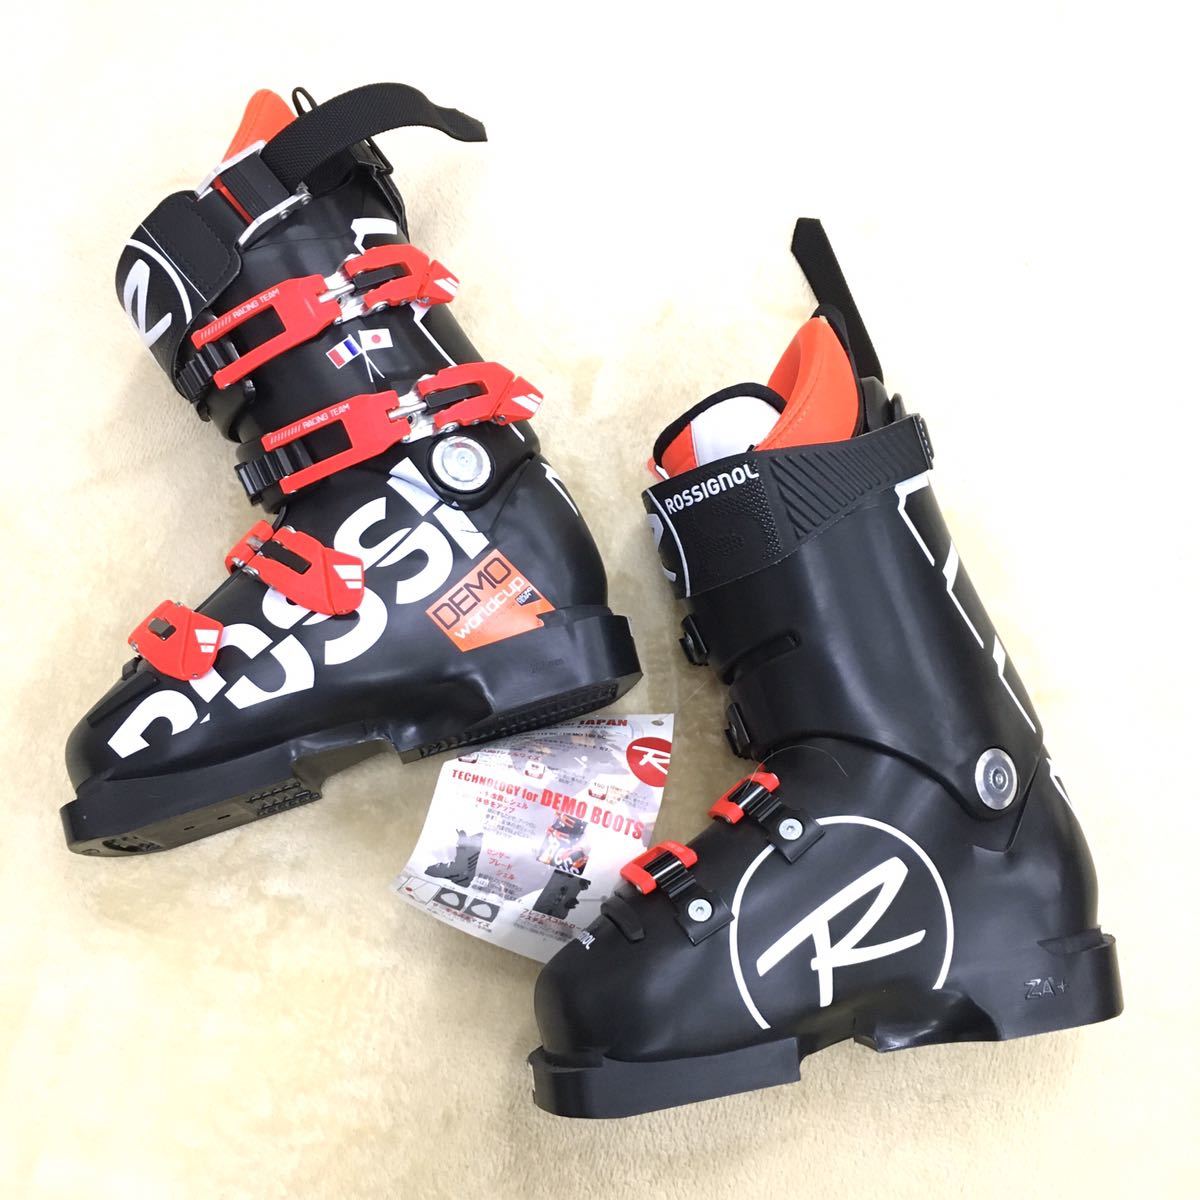  Rossignol DEMO World Cup ski demo boots lady's size 22.5cm day person himself oriented shell design shell wise winter sport 